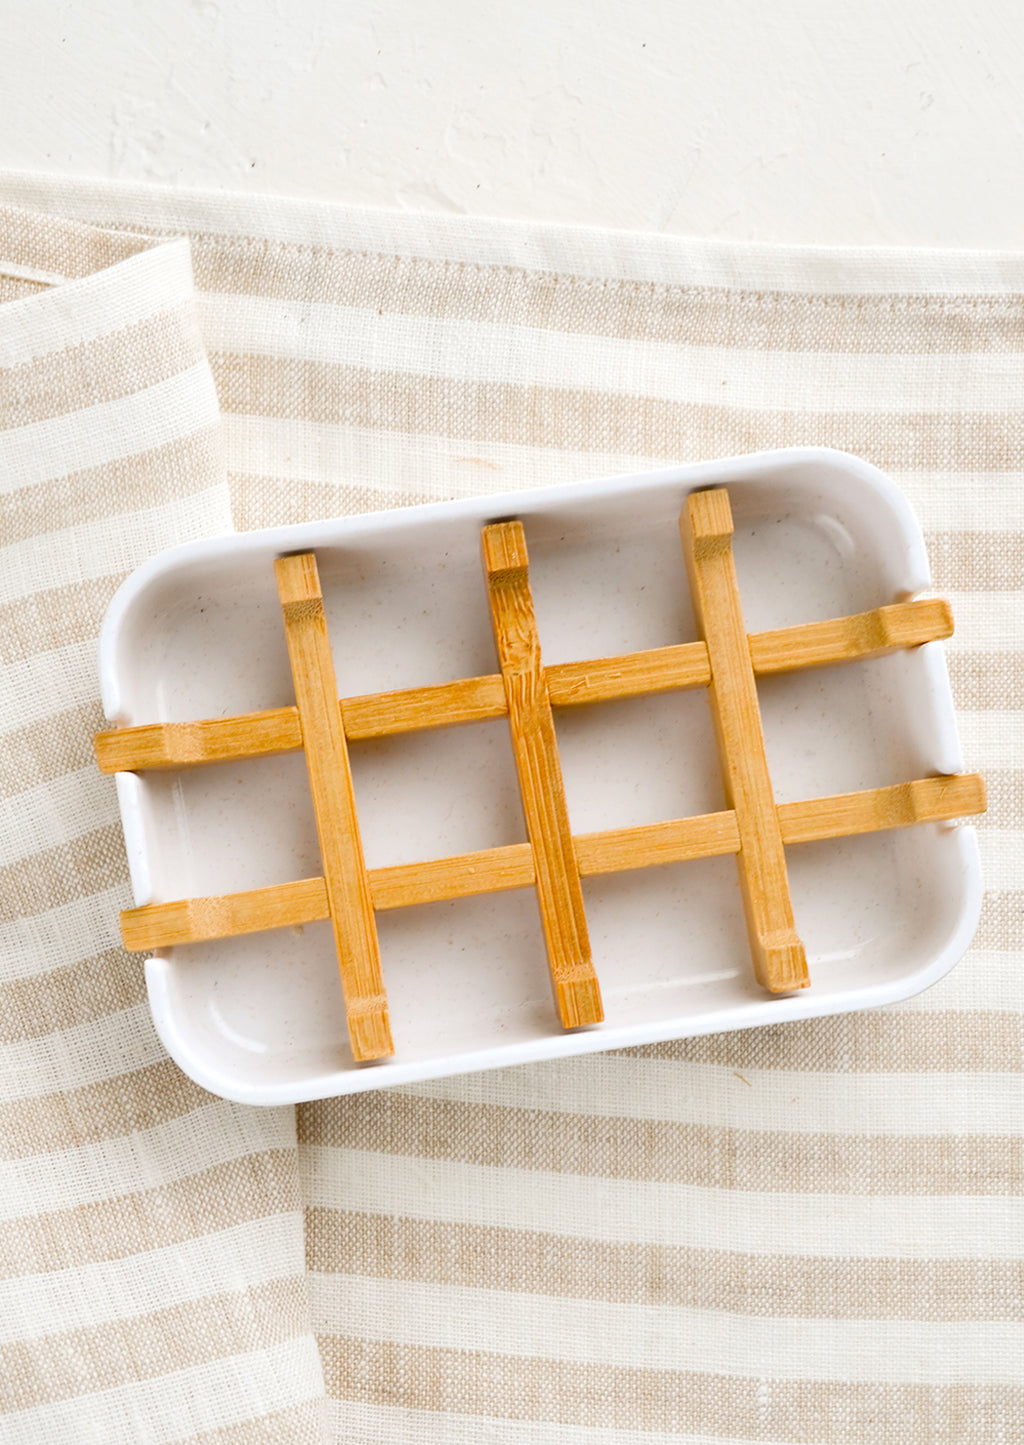 1: A white soap dish with built-in bamboo drainage tray.